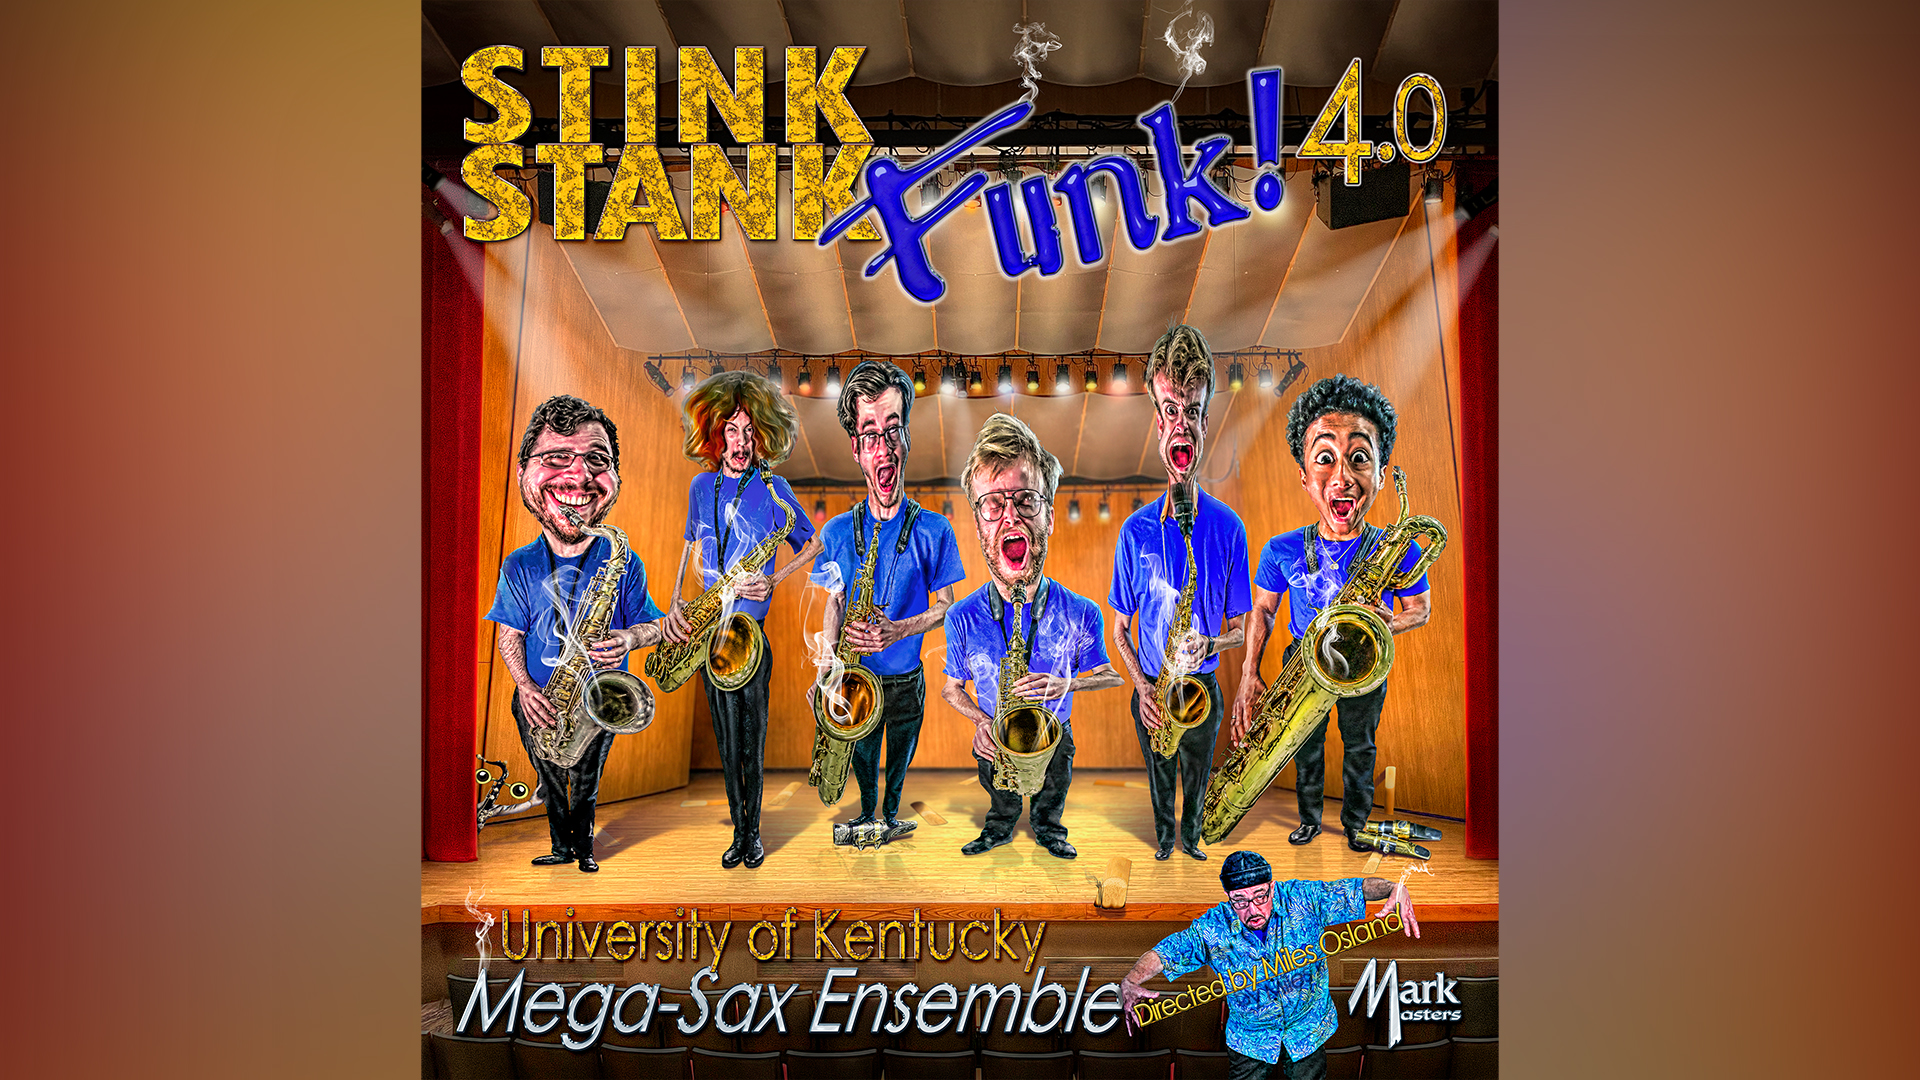 UK Mega-Sax latest album cover for "Stink, Stank, FUNK - 4.0," animated images of students onstage with their instruments